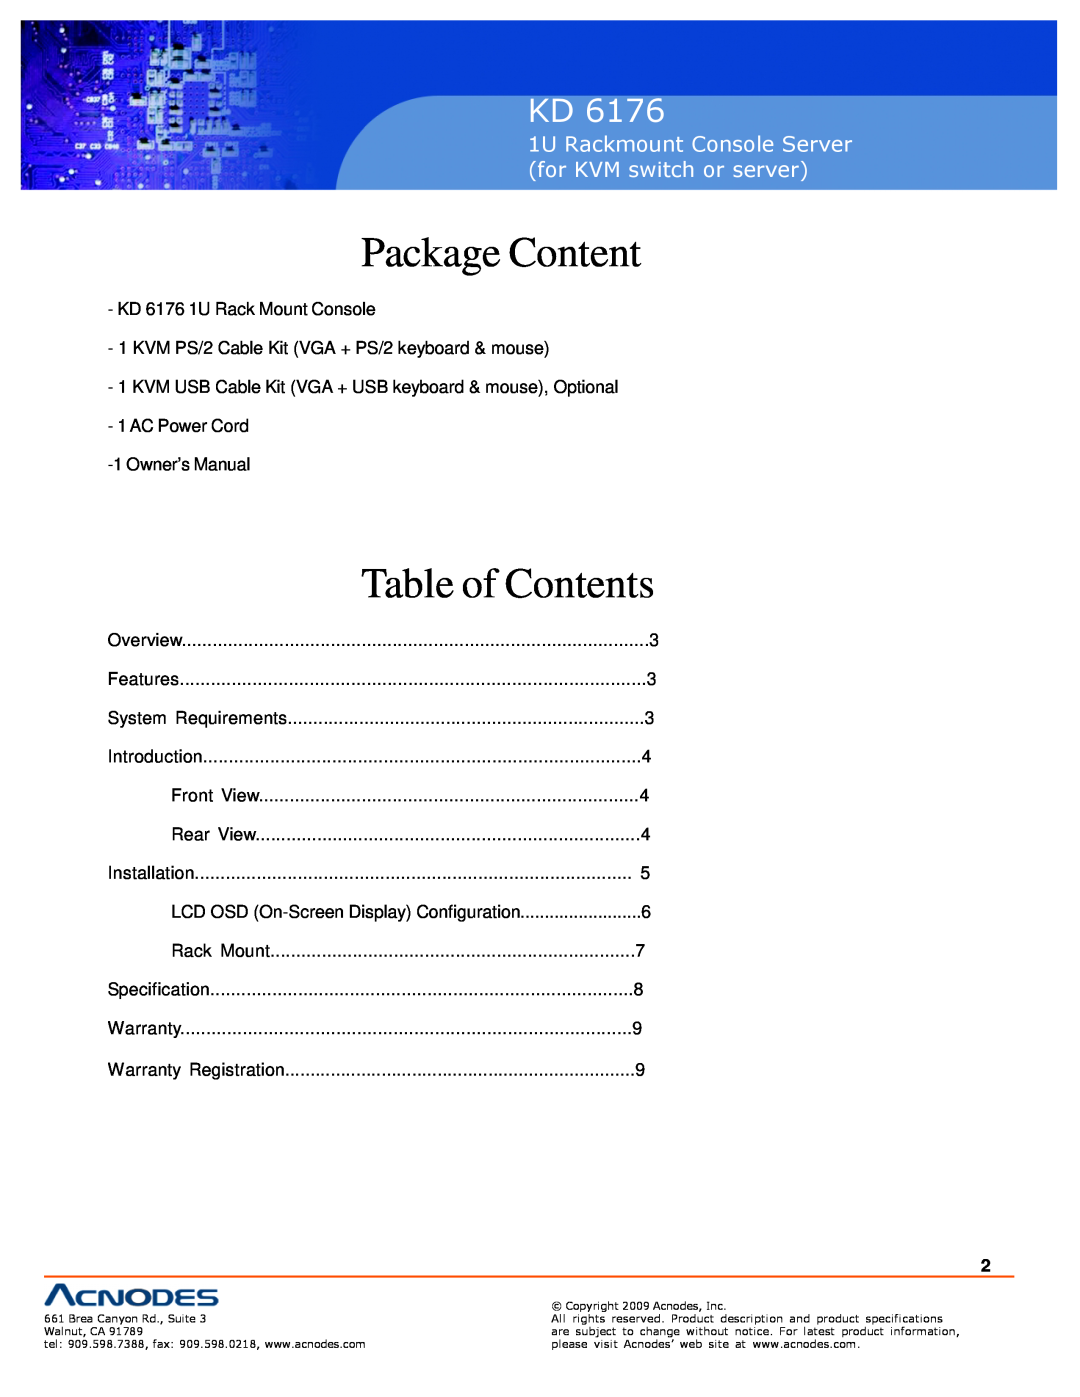 Acnodes KD 6176 user manual Package Content, Table of Contents, inch touch panel PC 